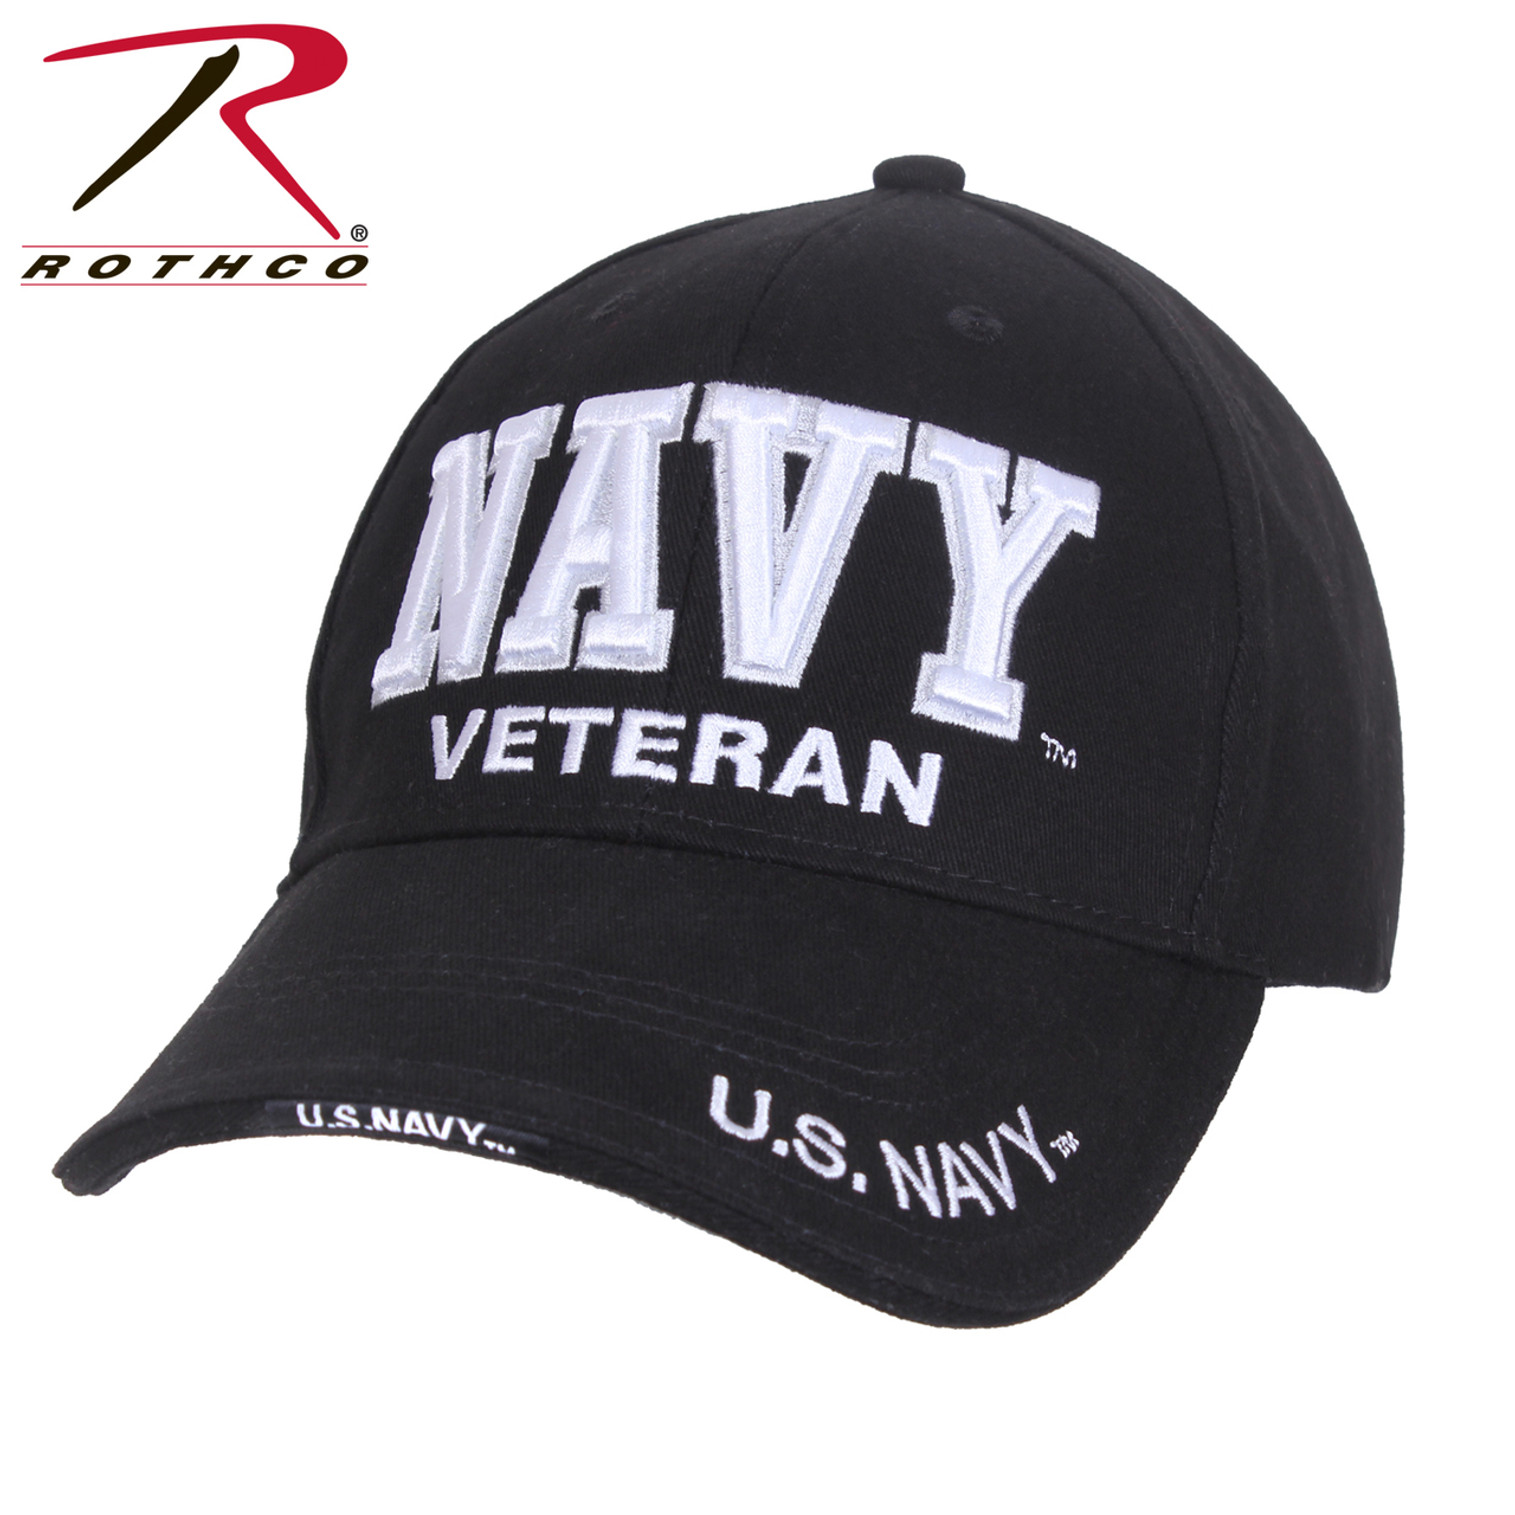 Rothco Deluxe Low Profile Military Branch Veteran Cap - Navy